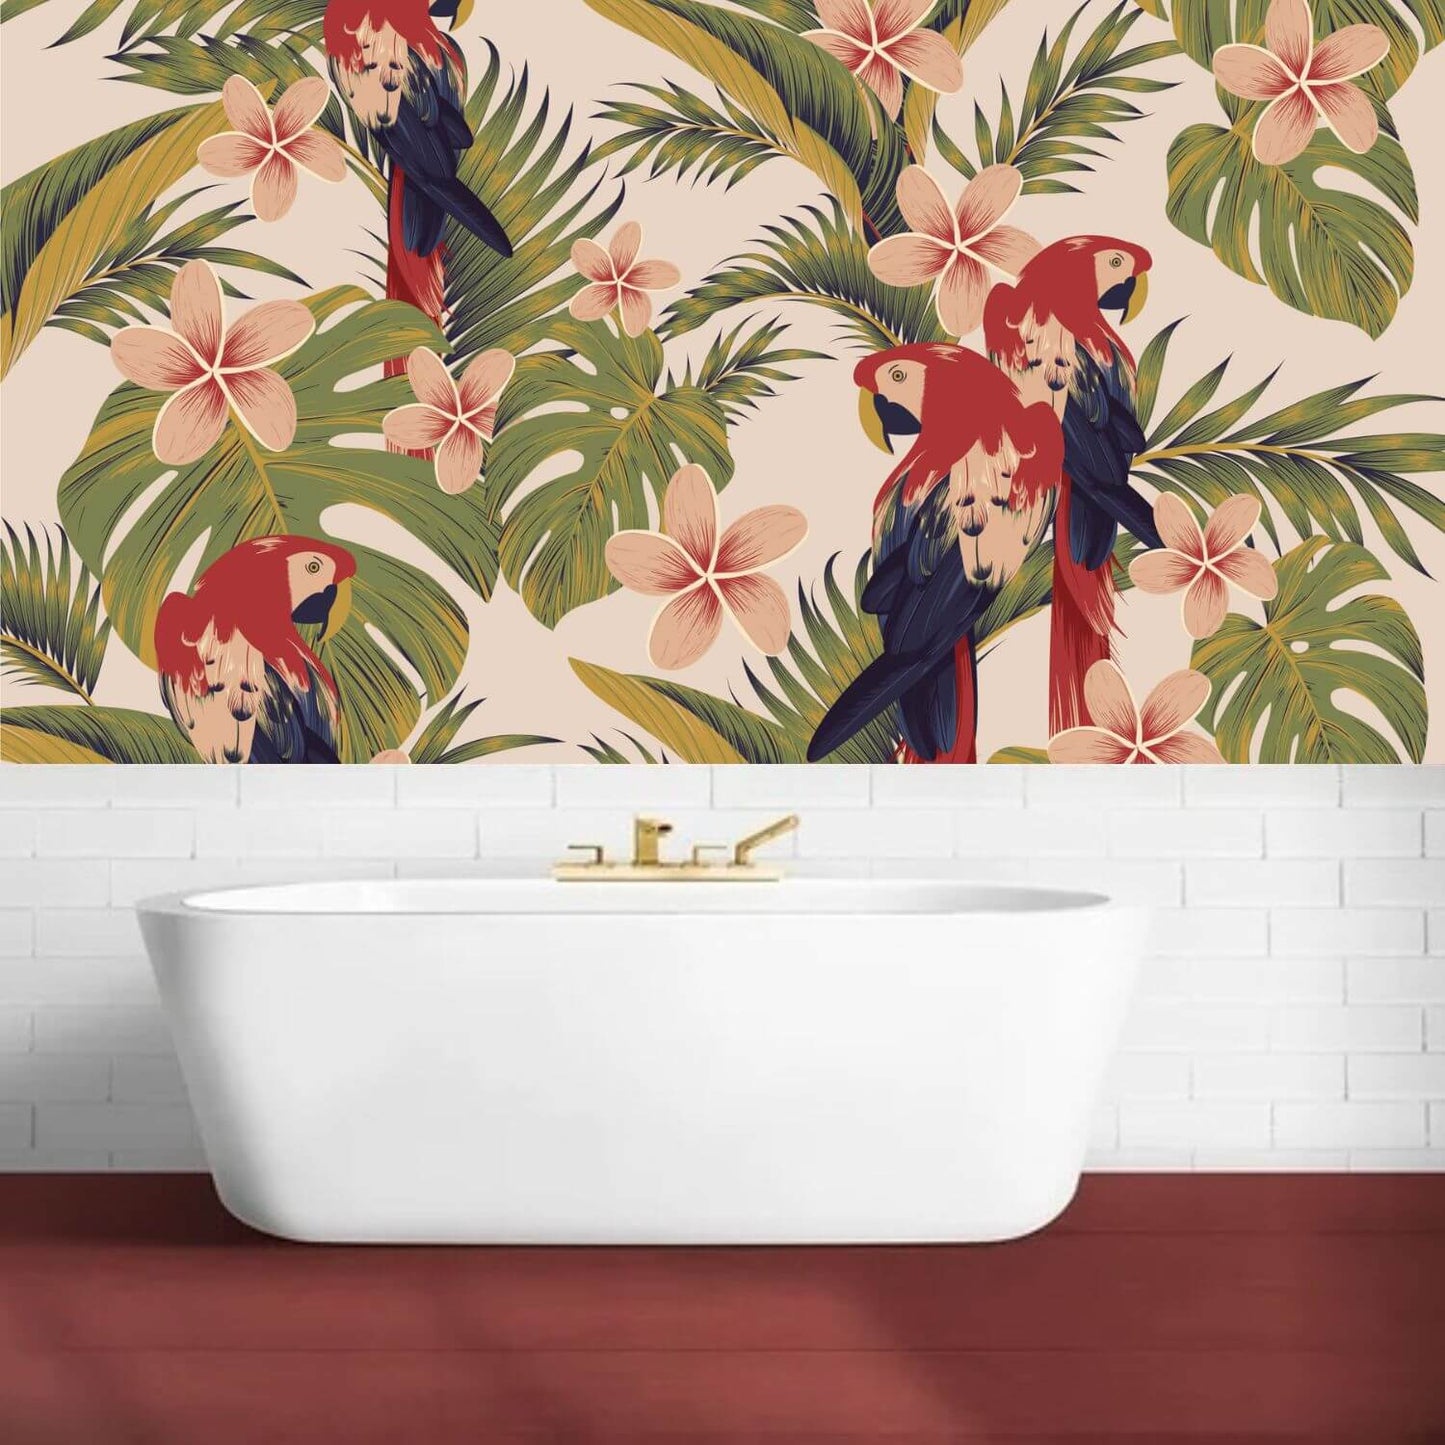 Parrots and Tropical Leaves Mural Wallpaper (SqM)